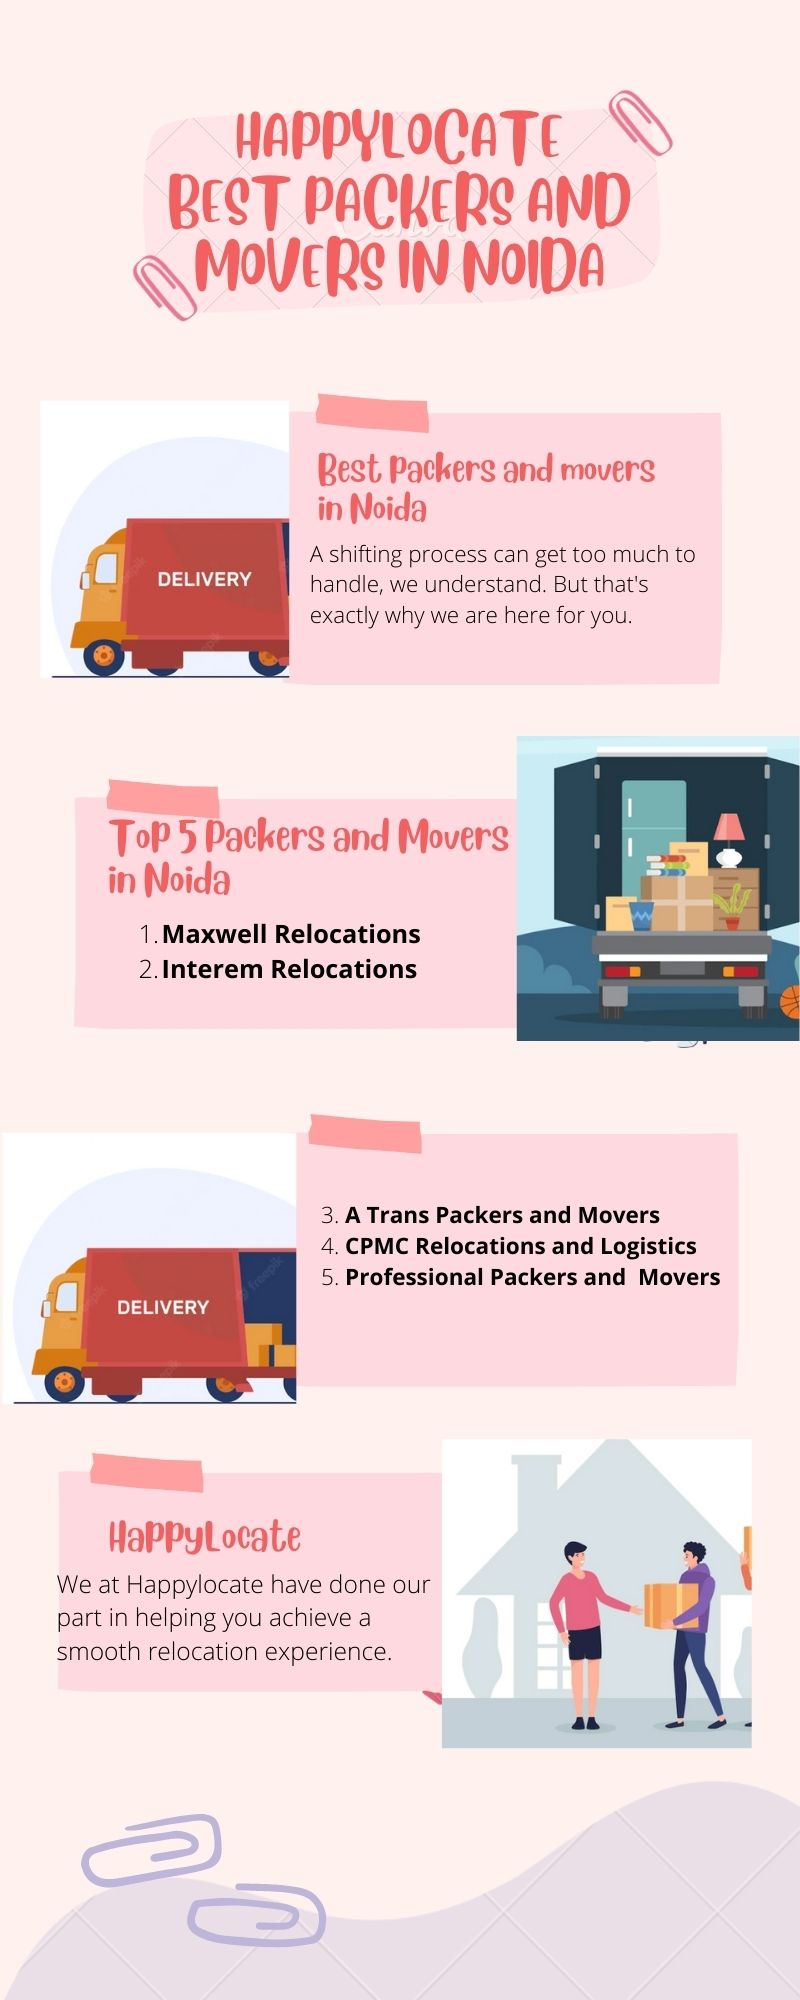 HAPPYLOCATE
BEAT PACKERS AND
QMoVERe IN NOIDA

Best, Packers and movers

in Noida

A shifting process can get toc much to
handle, we understand. But that's

  

exaclly why we are here for you

 

Tob 5 Packers and Movers
in Noida

1 Maxwell Relocations

/ Interem Relocations

 

1 A Trans Packers and Movers
4 CPMC Relocations and Logistics
5 Professional Packers and Movers

 

HaPPyLocate e - |
We at Happylocate have done our I \
part in helping you achieve a [|
SMOOTN relocation experience